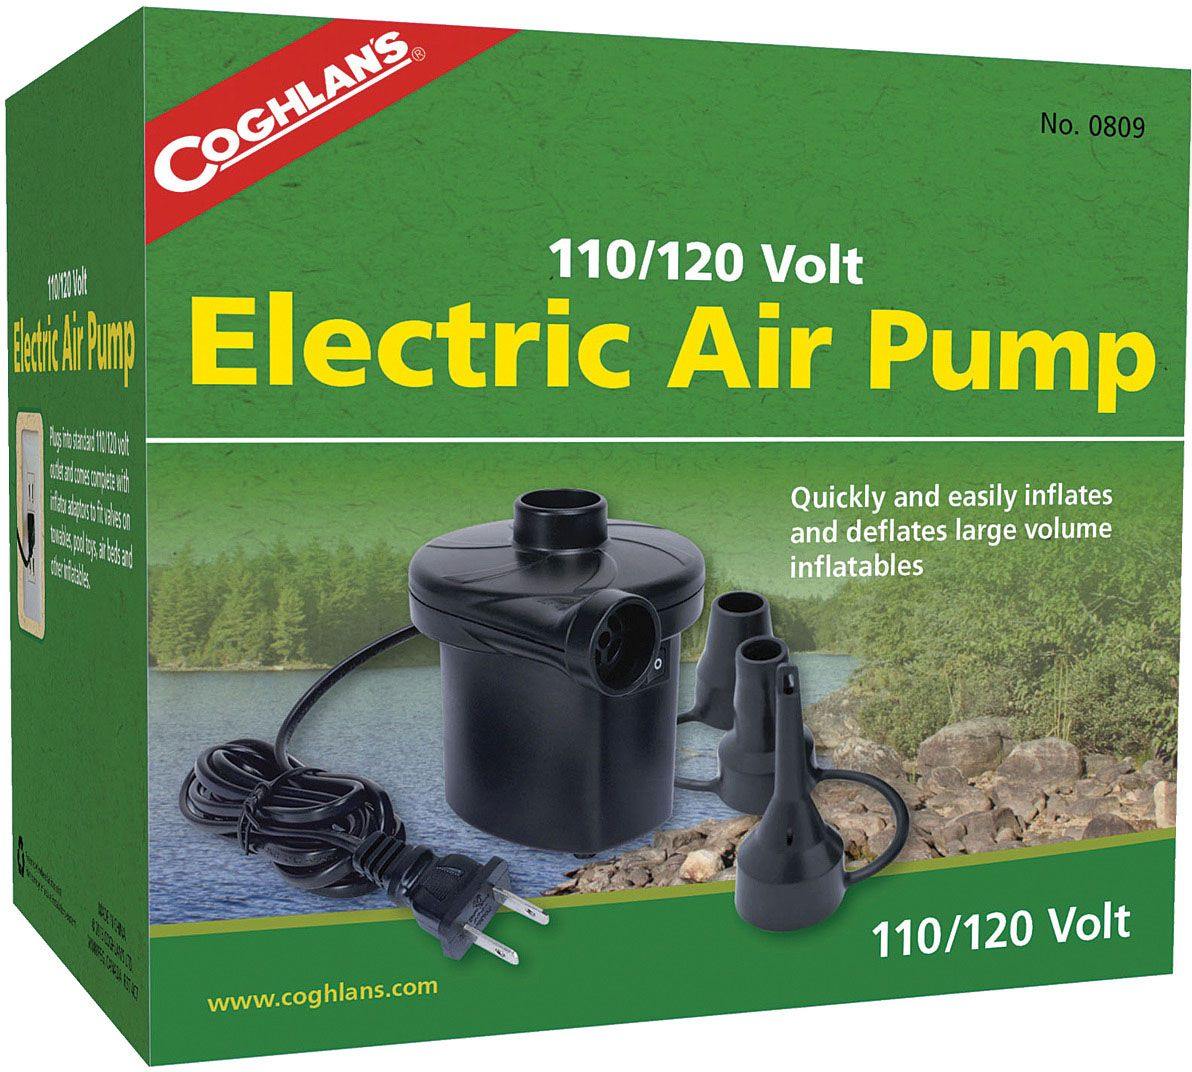 Coughlan's Kayak Accessories 110/120V ELECTRIC AIR PUMP Coughlan's - ELECTRIC AIR PUMP